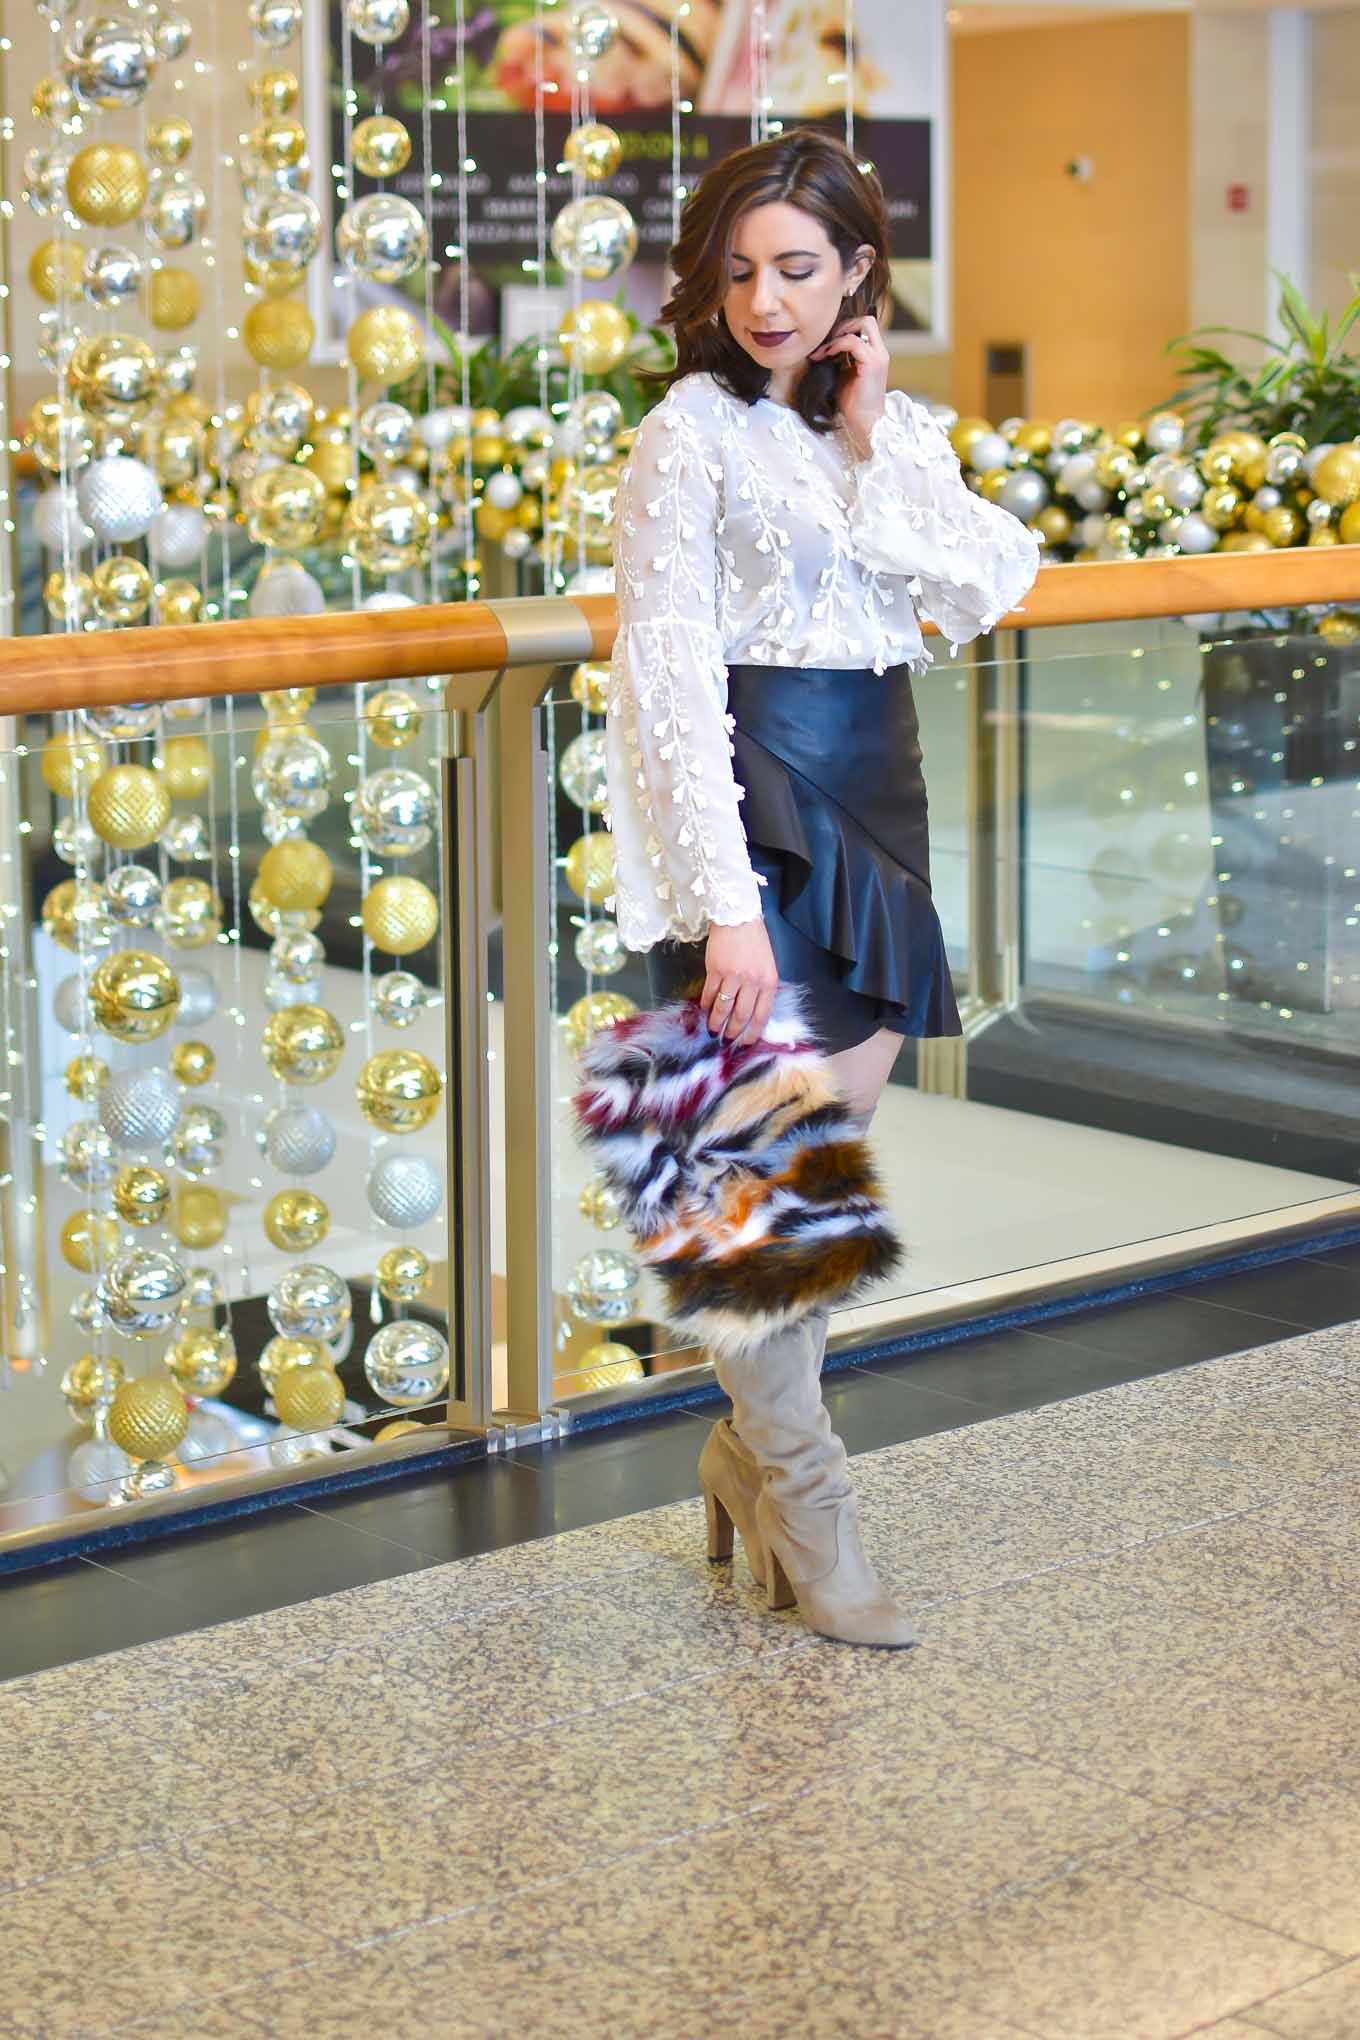 Lifestyle blogger Roxanne of Glass of Glam wearing a faux leather skirt, Shein embroidered blouse, faux fur clutch, and Steve Madden boots - Golden Birthday Wisdom by popular Chicago fashion blogger Glass of Glam